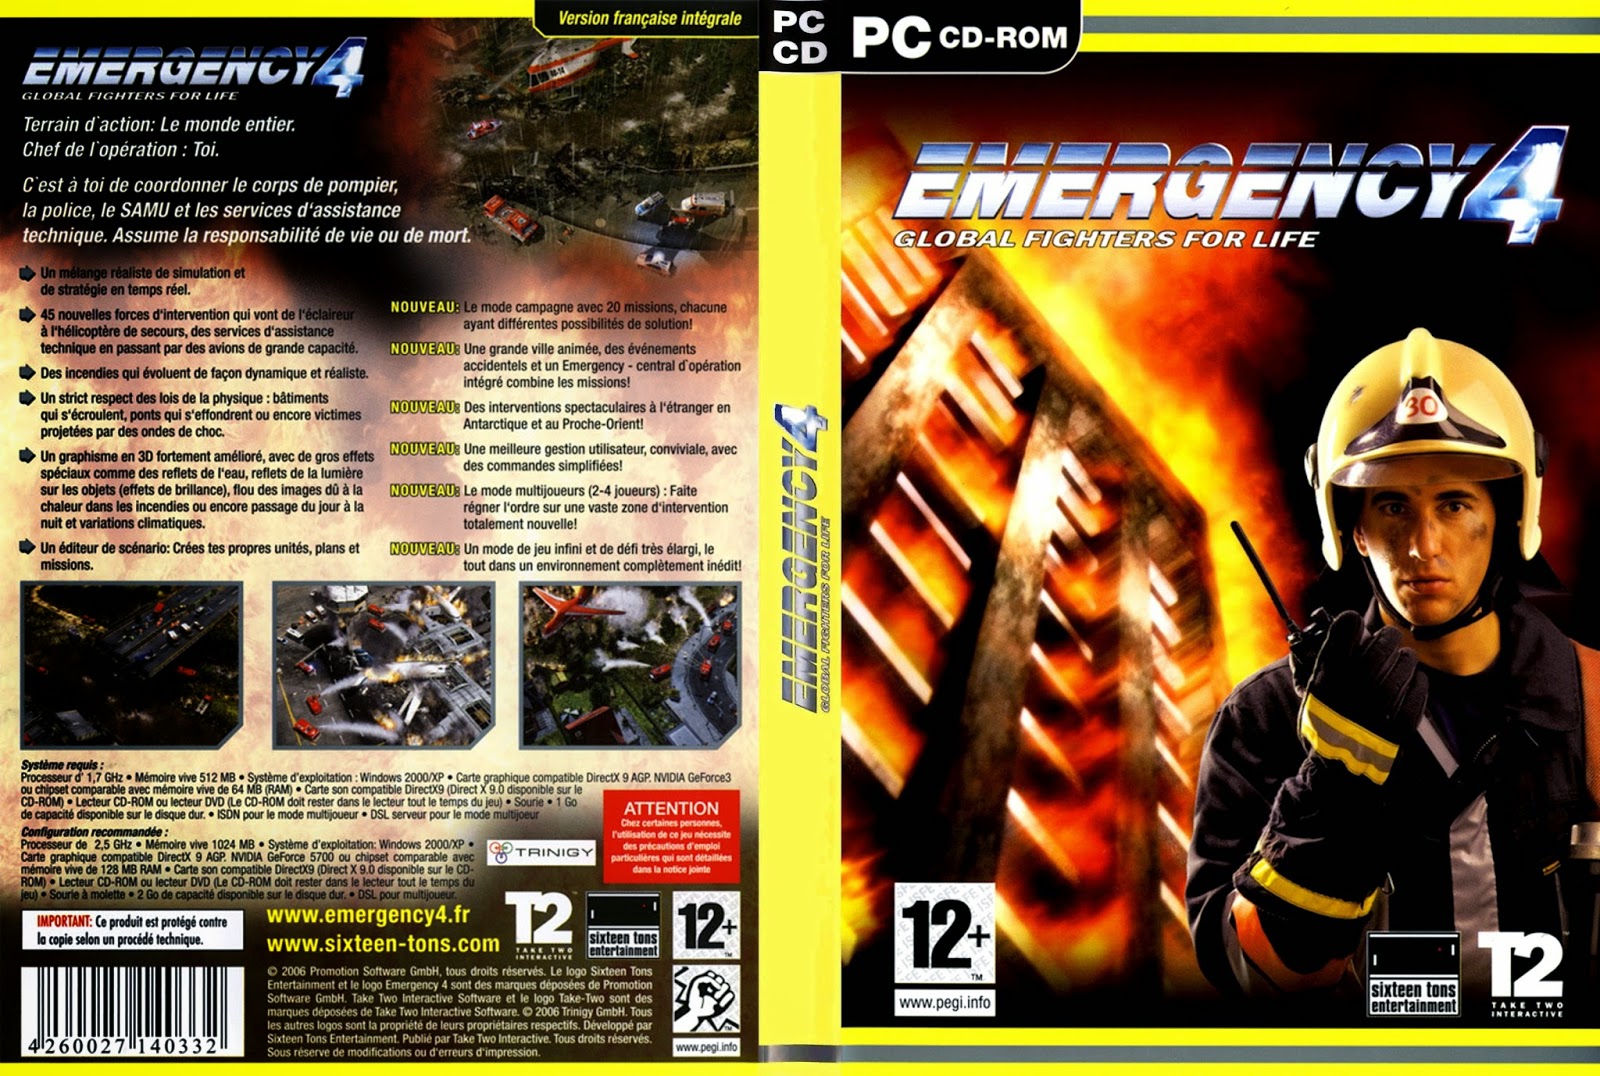 download game emergency 4 global fighters for life full episodes